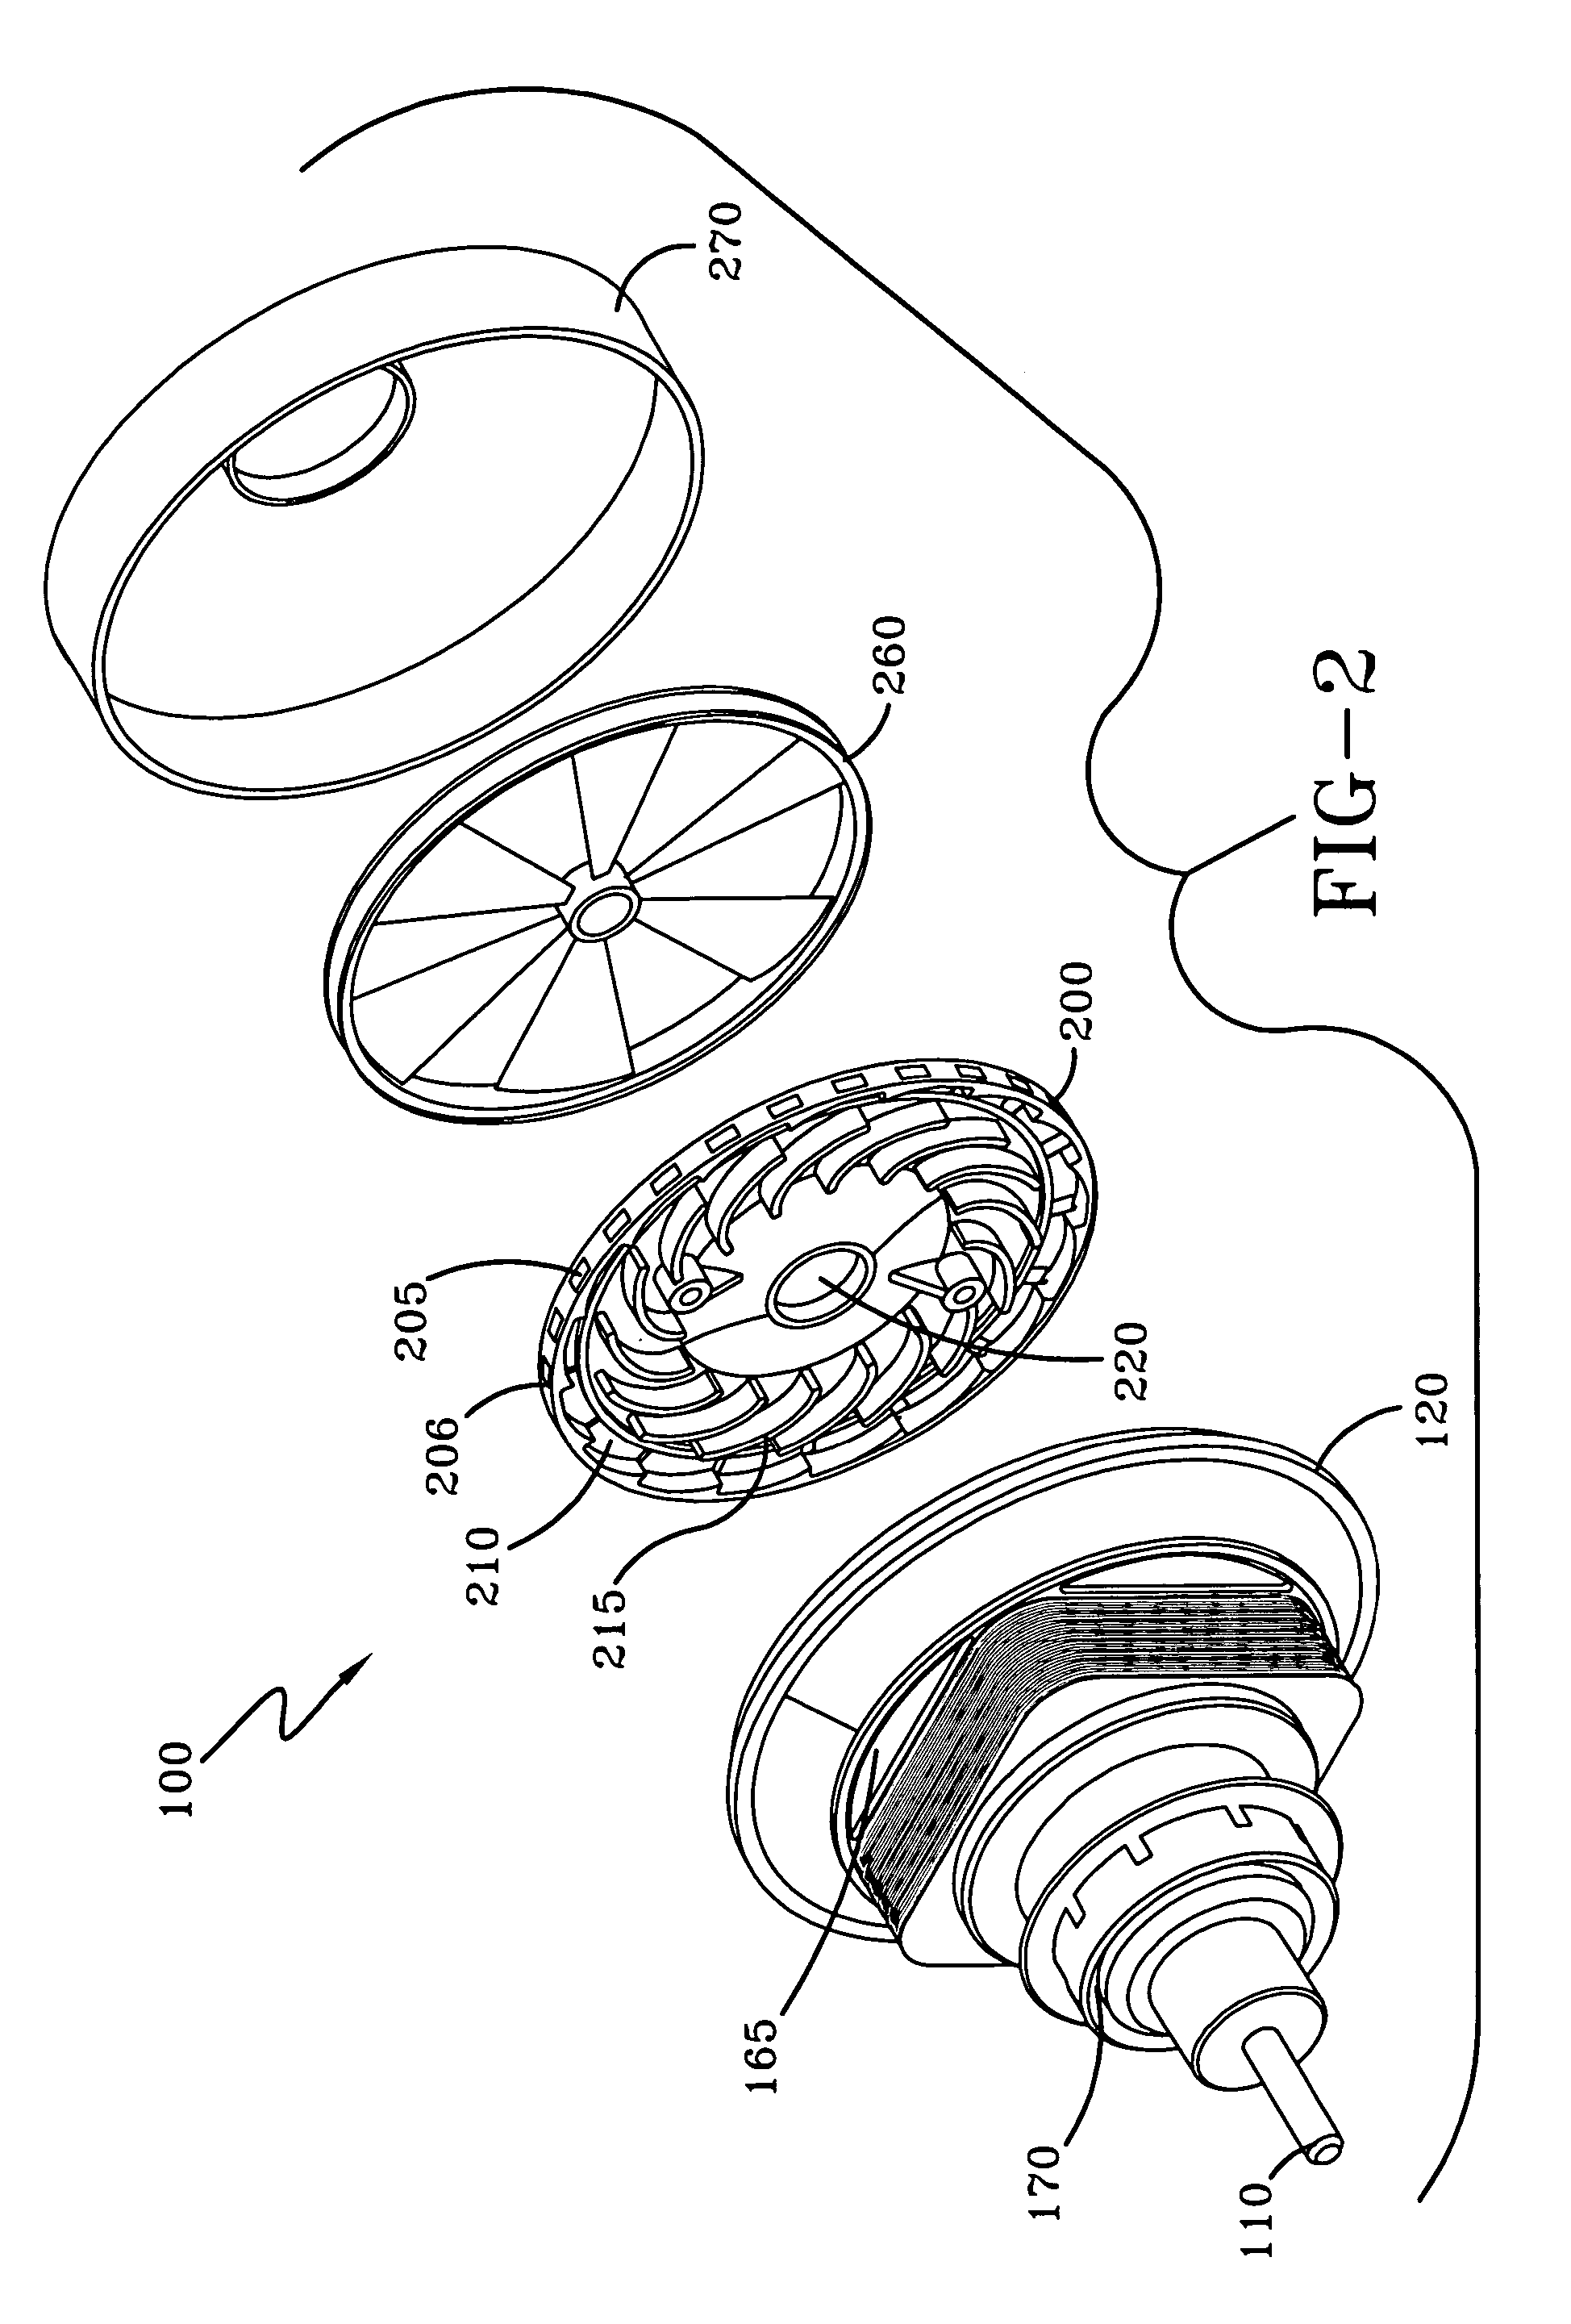 Diffuser for a motor fan assembly